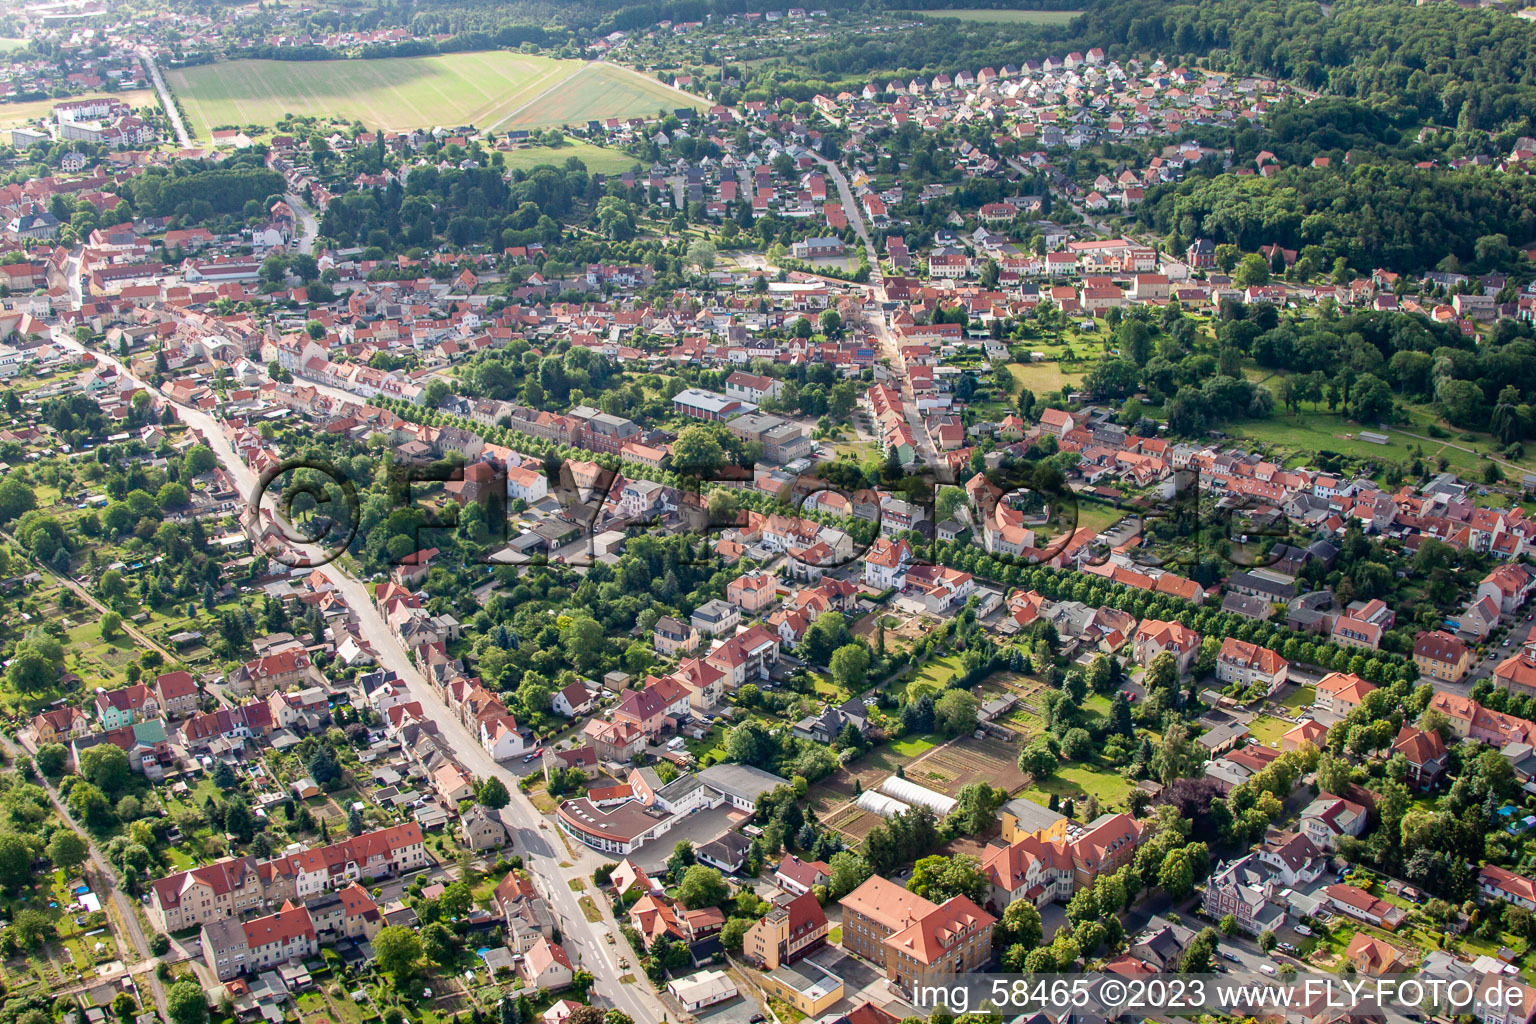 Aerial photograpy of Between B185 and Allee in Ballenstedt in the state Saxony-Anhalt, Germany